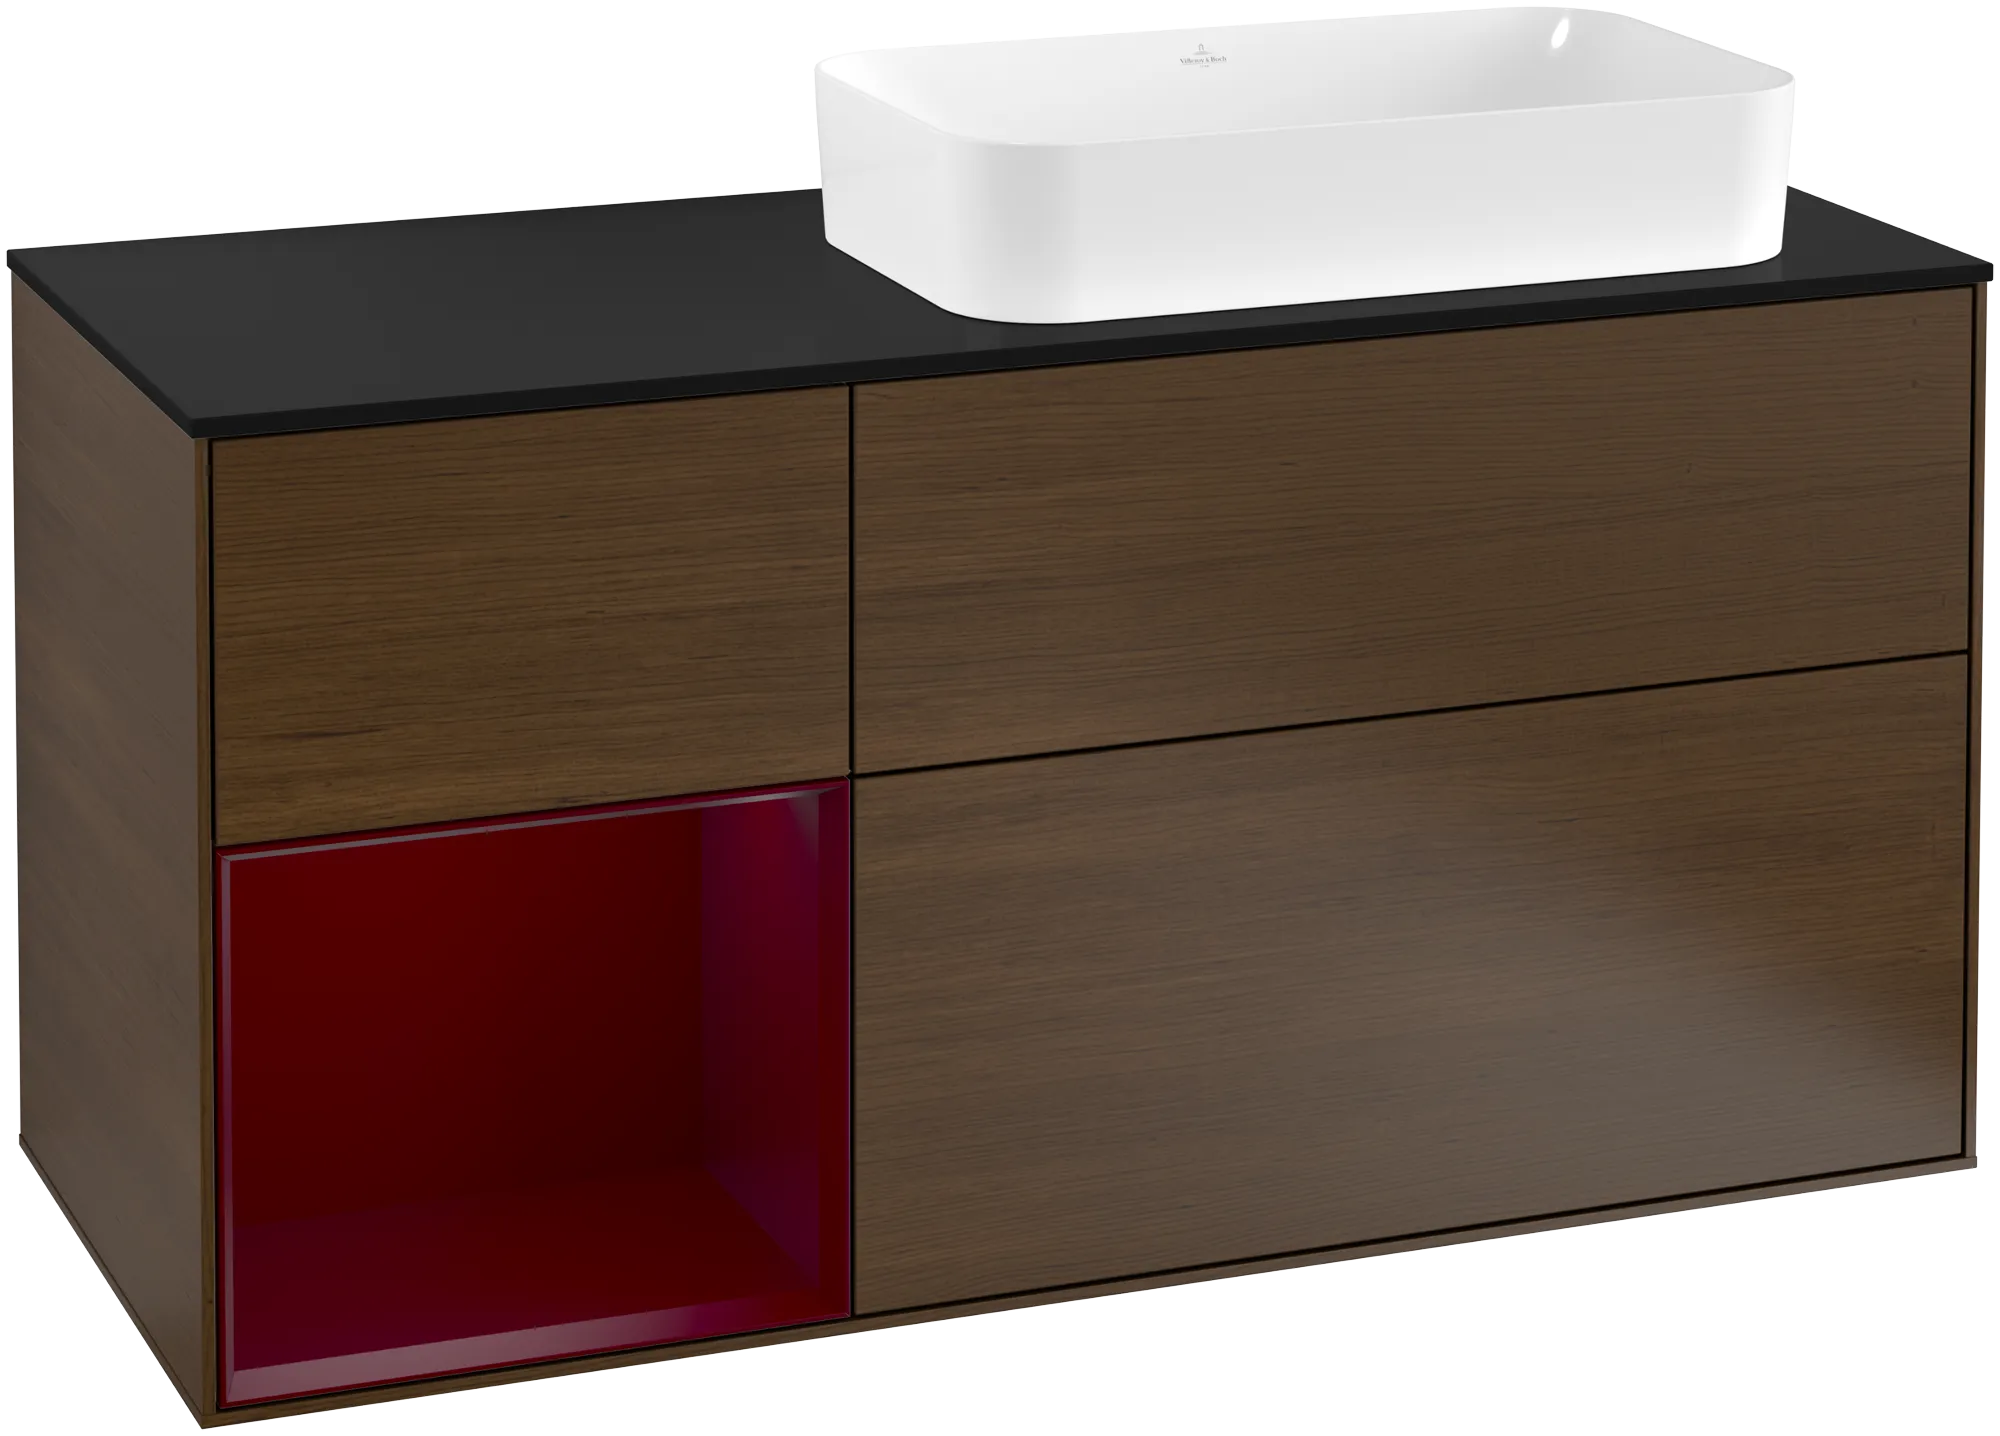 Picture of VILLEROY BOCH Finion Vanity unit, with lighting, 3 pull-out compartments, 1200 x 603 x 501 mm, Walnut Veneer / Peony Matt Lacquer / Glass Black Matt #G272HBGN